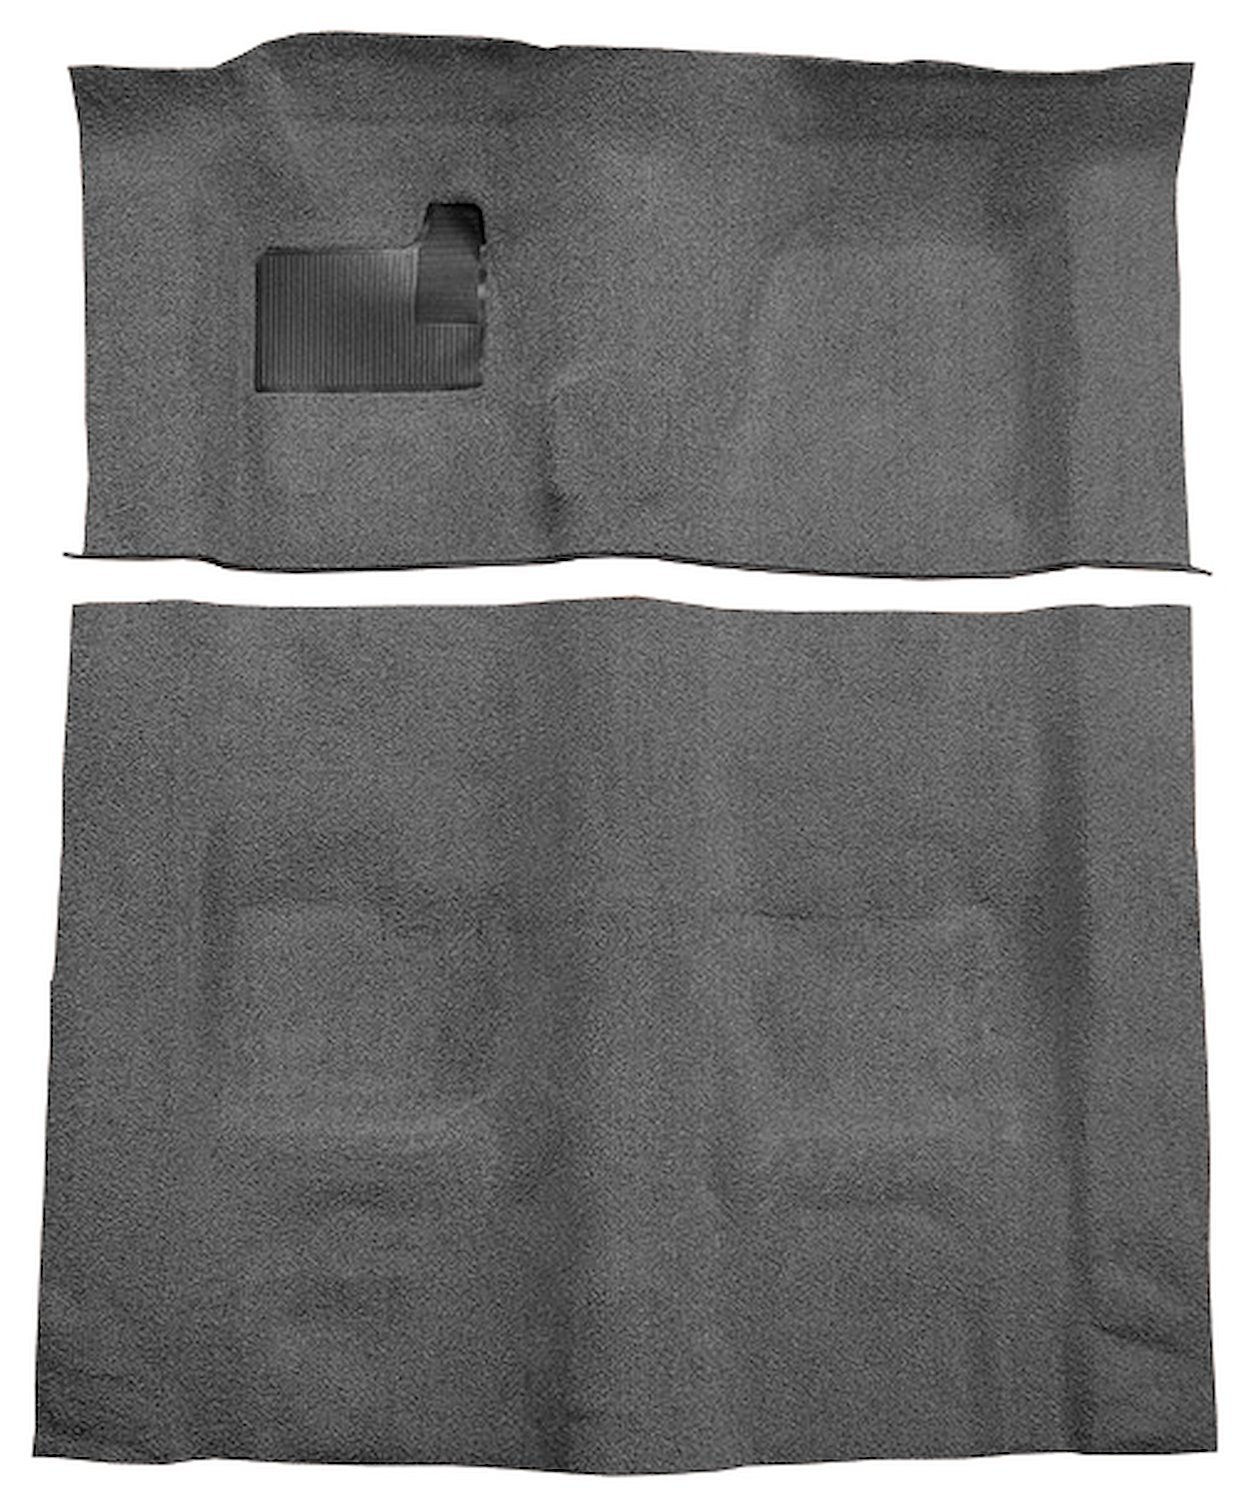 Molded Cut Pile Carpet for 1974-1975 Chevy Camaro,